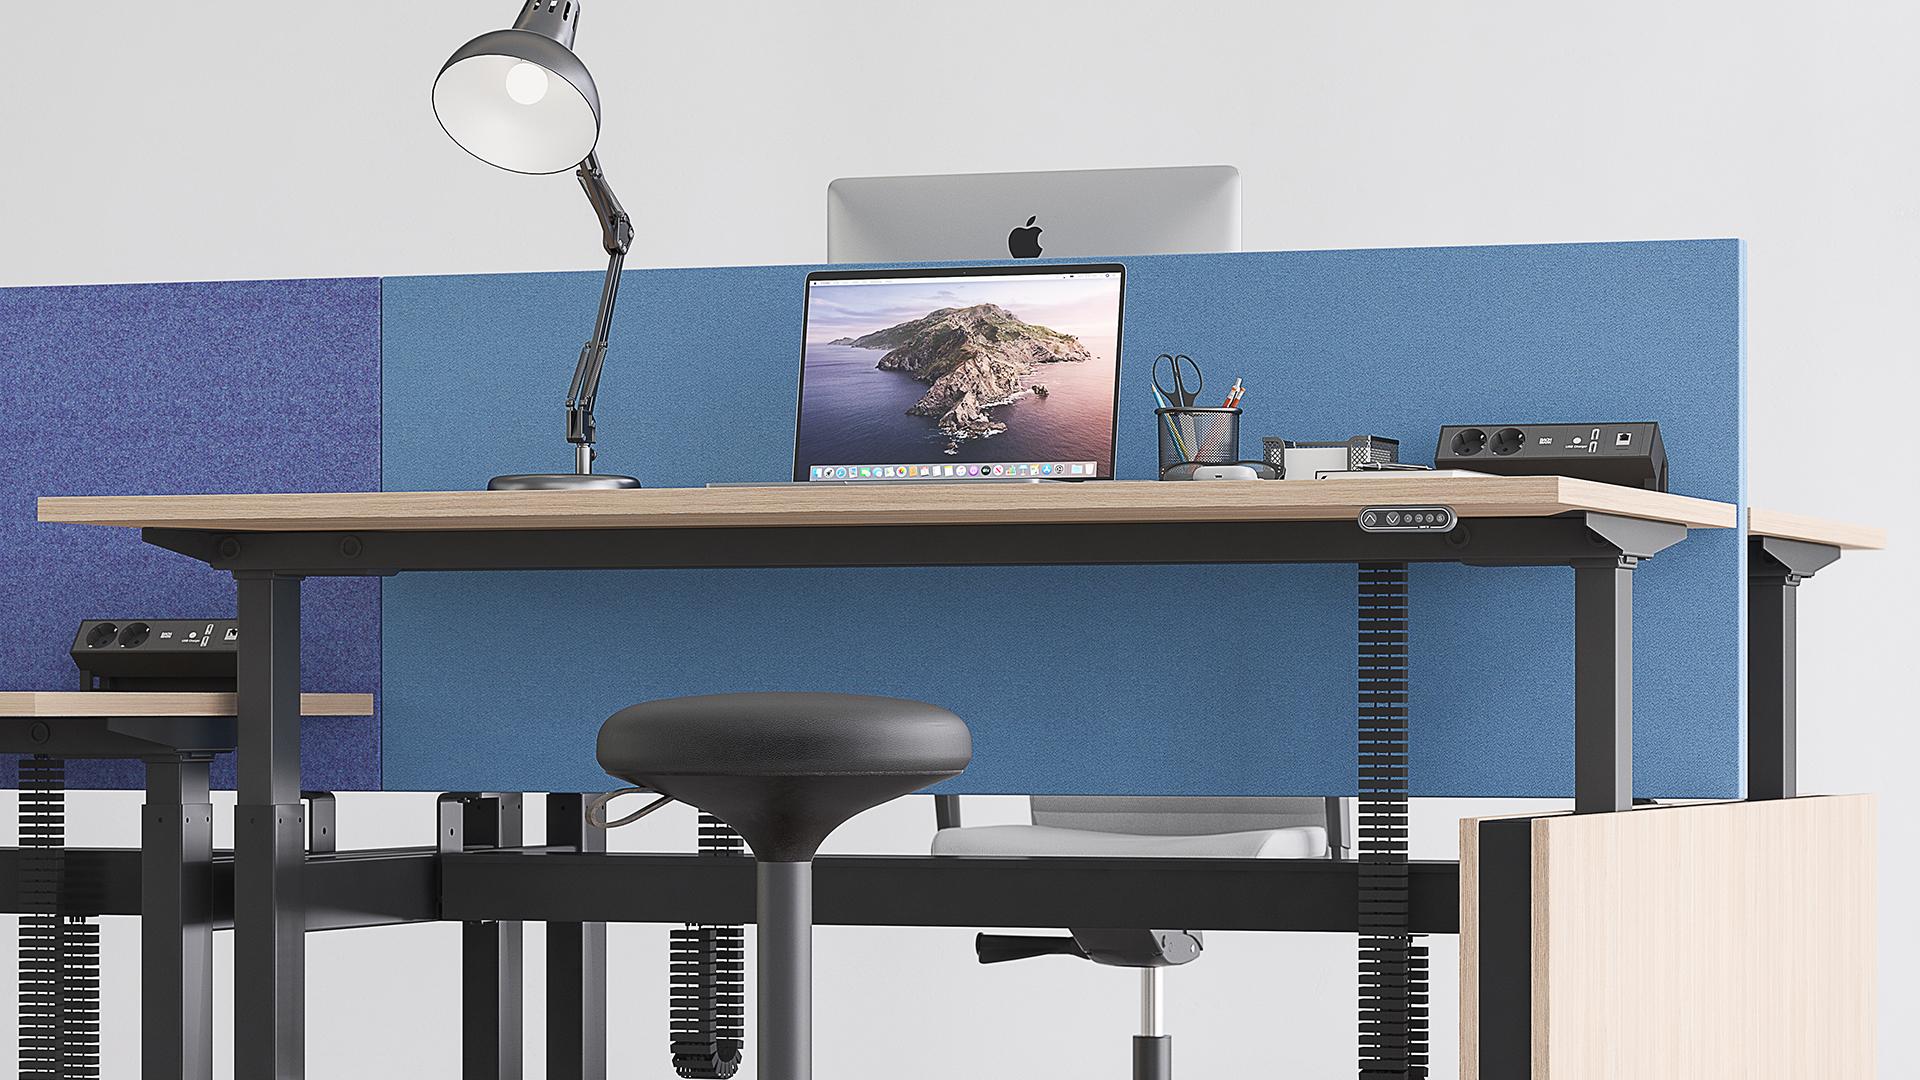 Choose from a large range of fabric colour choices for both sides of the Modus desk screen